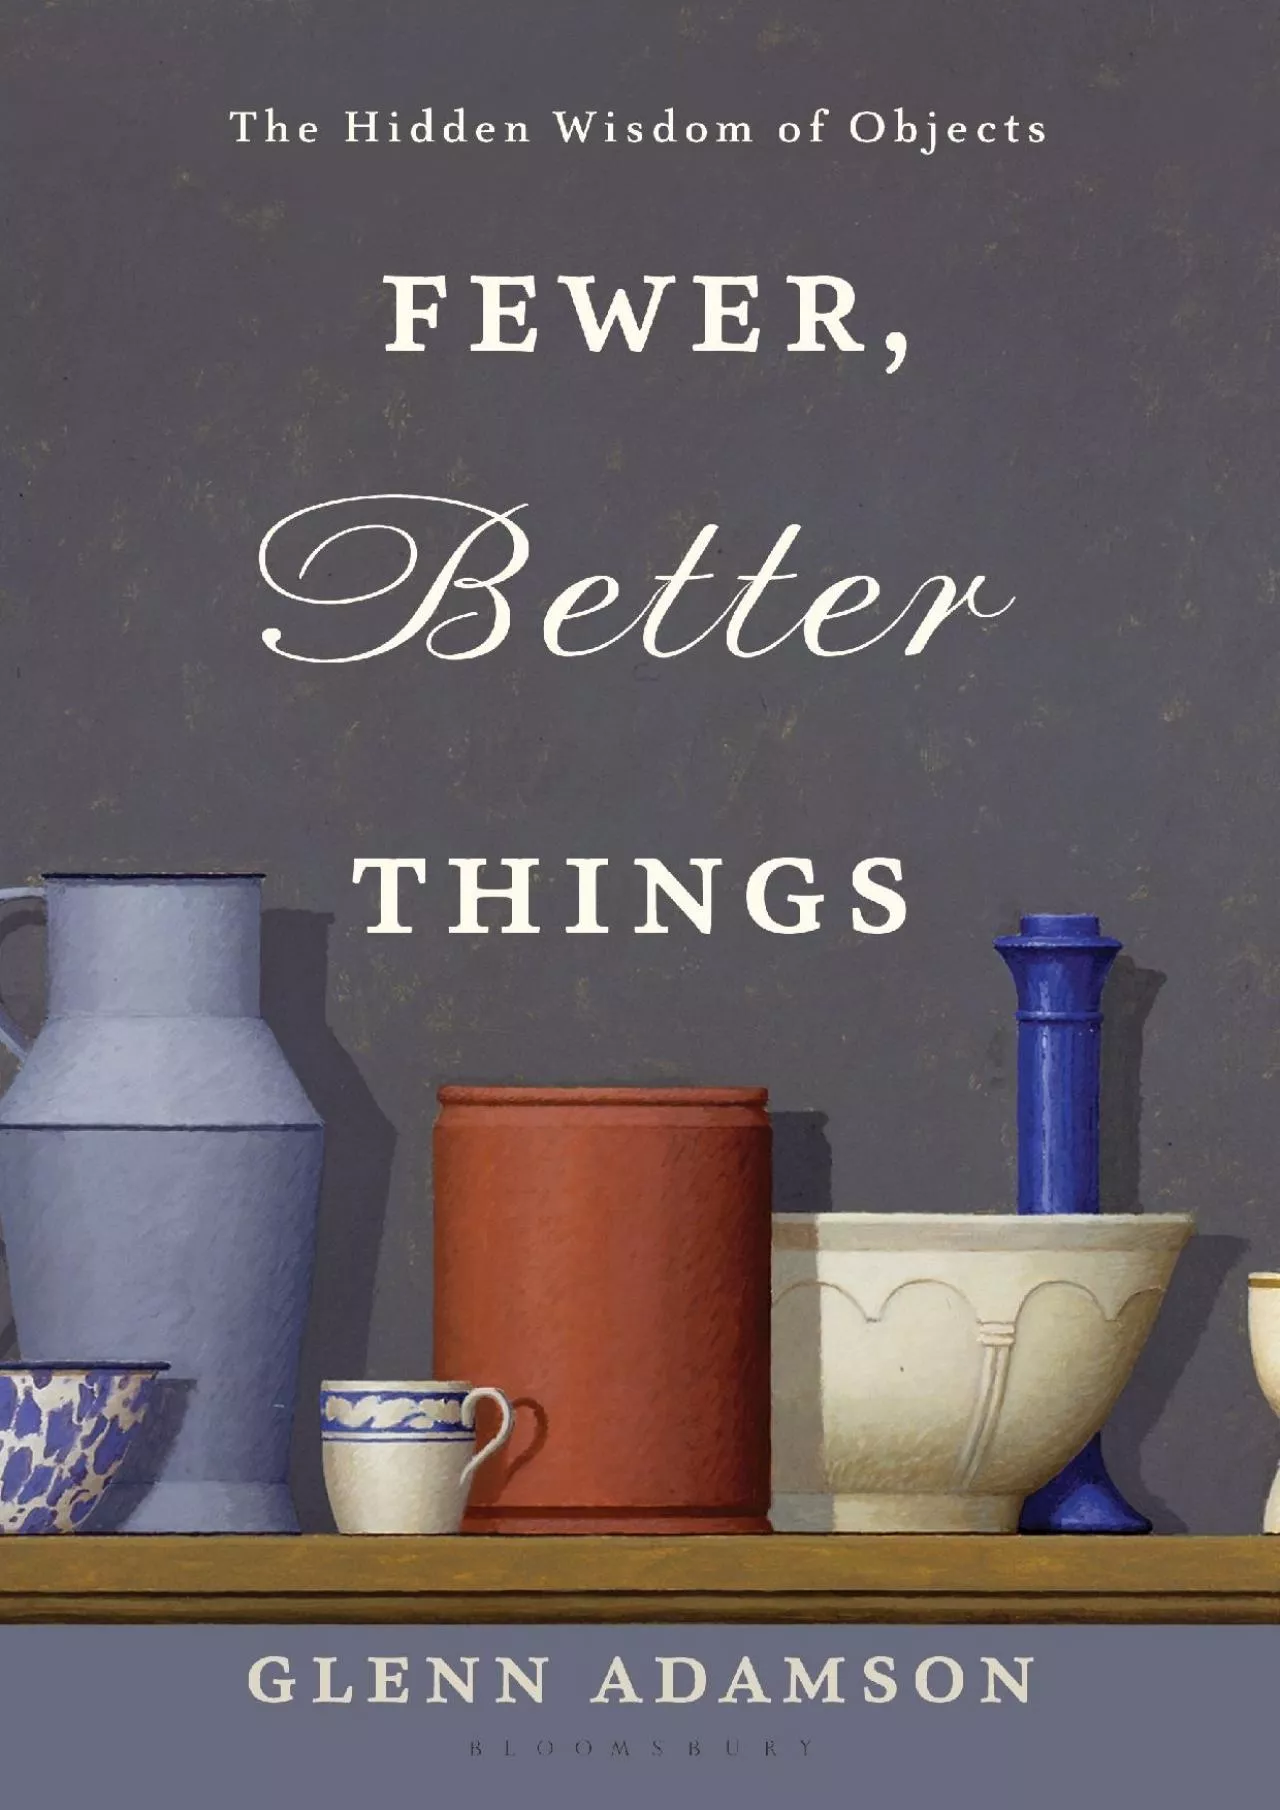 (BOOS)-Fewer, Better Things: The Hidden Wisdom of Objects